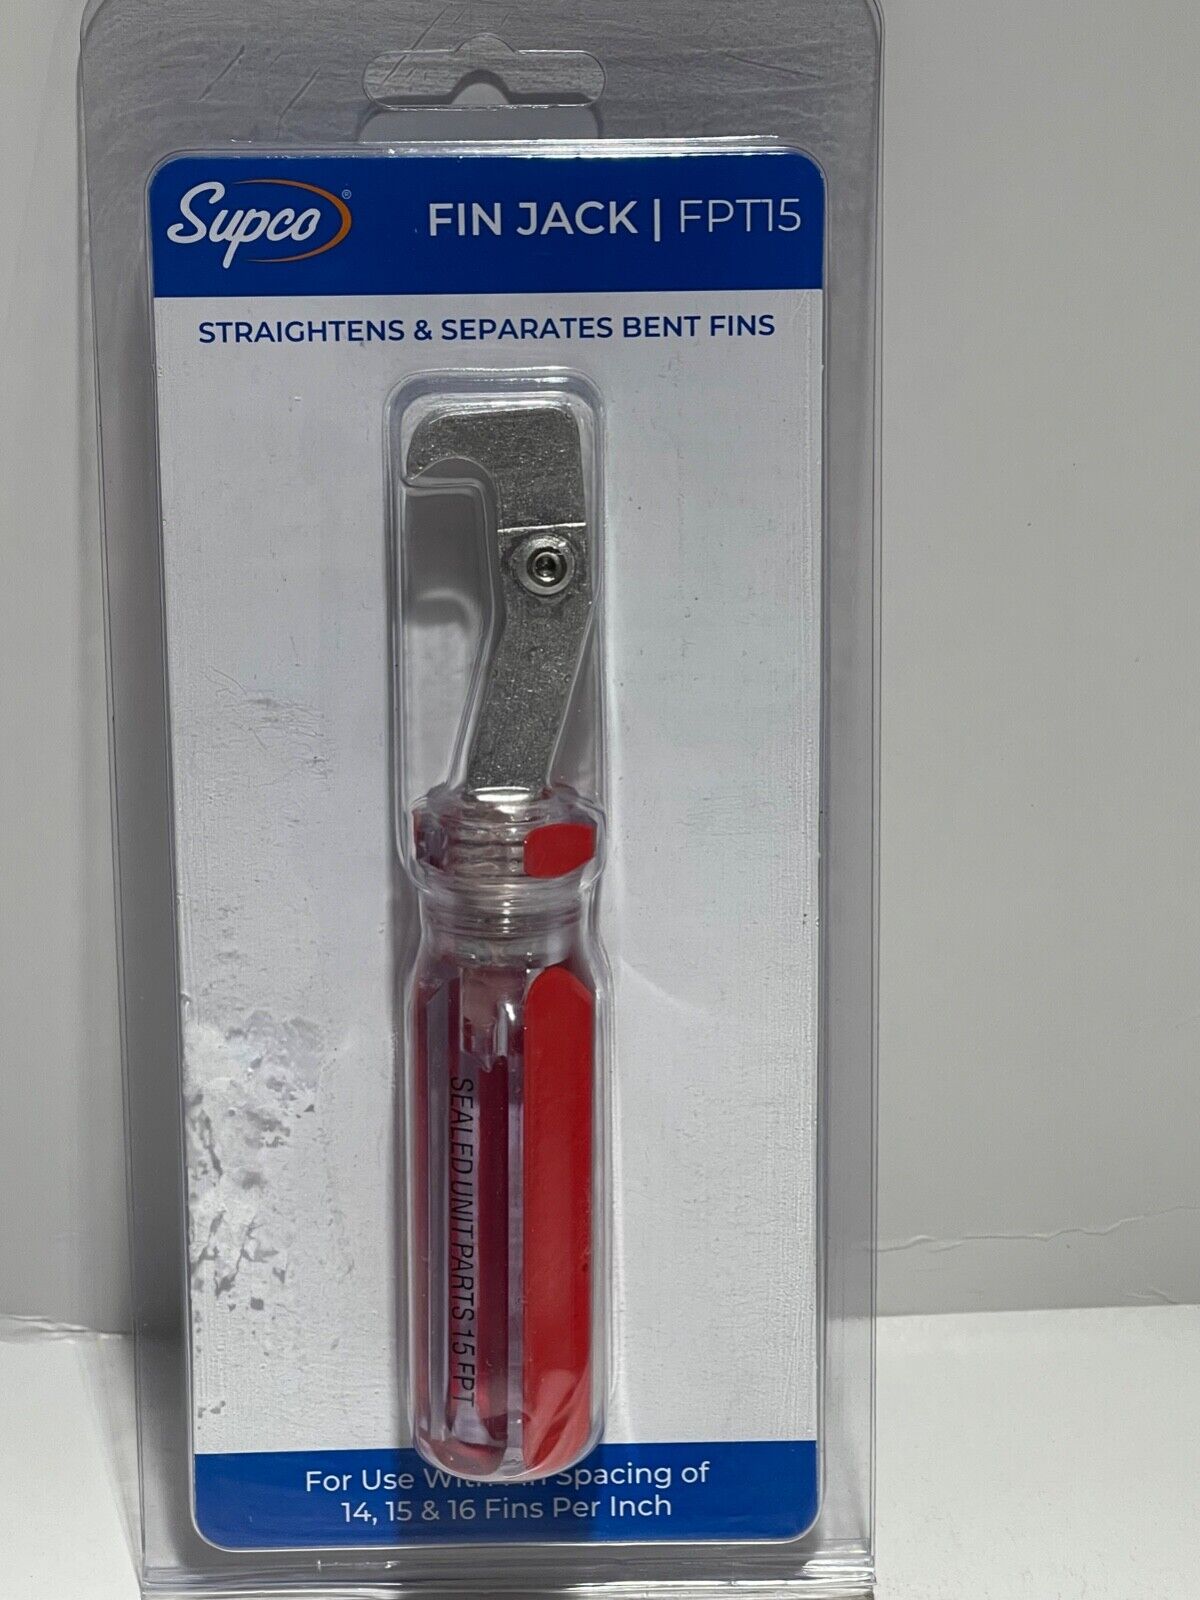 Supco FPT15 Fin Jack Straightens & Separates Bent A/C Fins 14,15 and 16 Fins